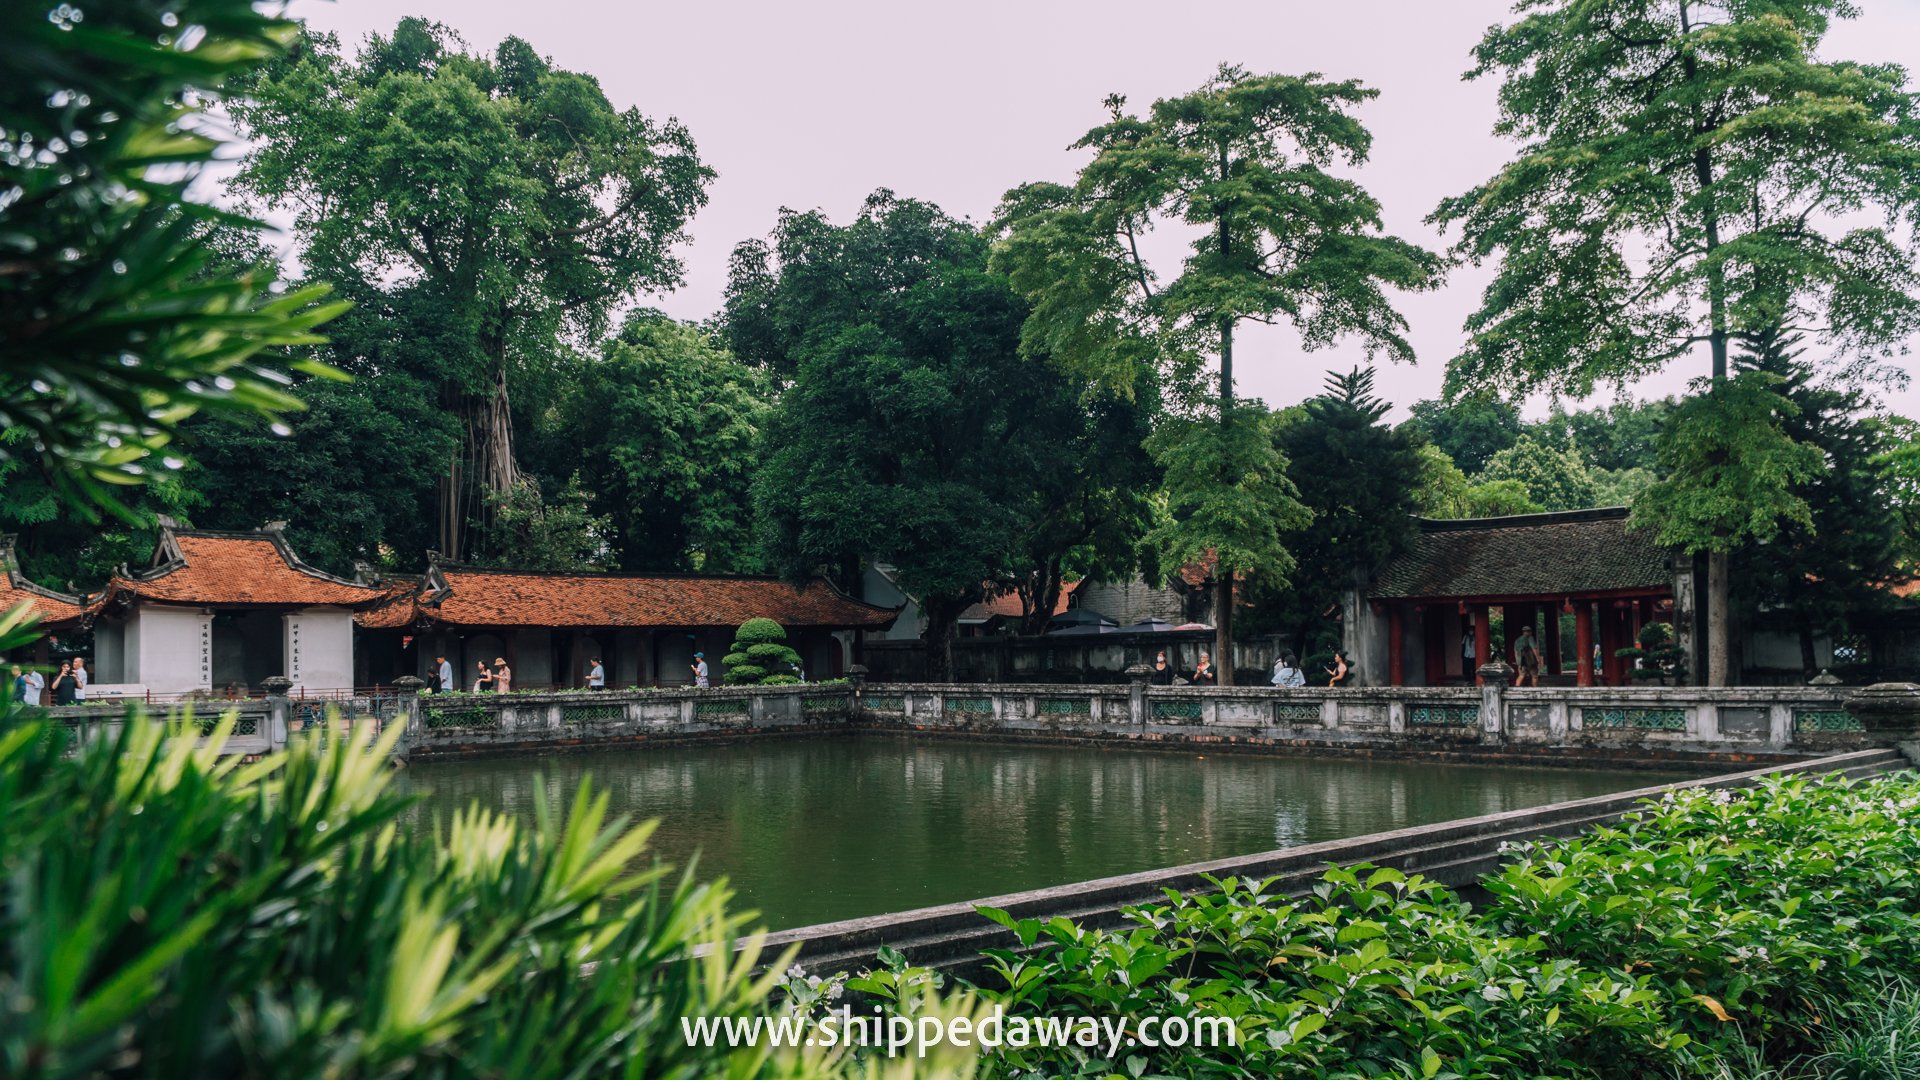 Beautiful pond and greenery at the Temple of Literature, Hanoi, Vietnam